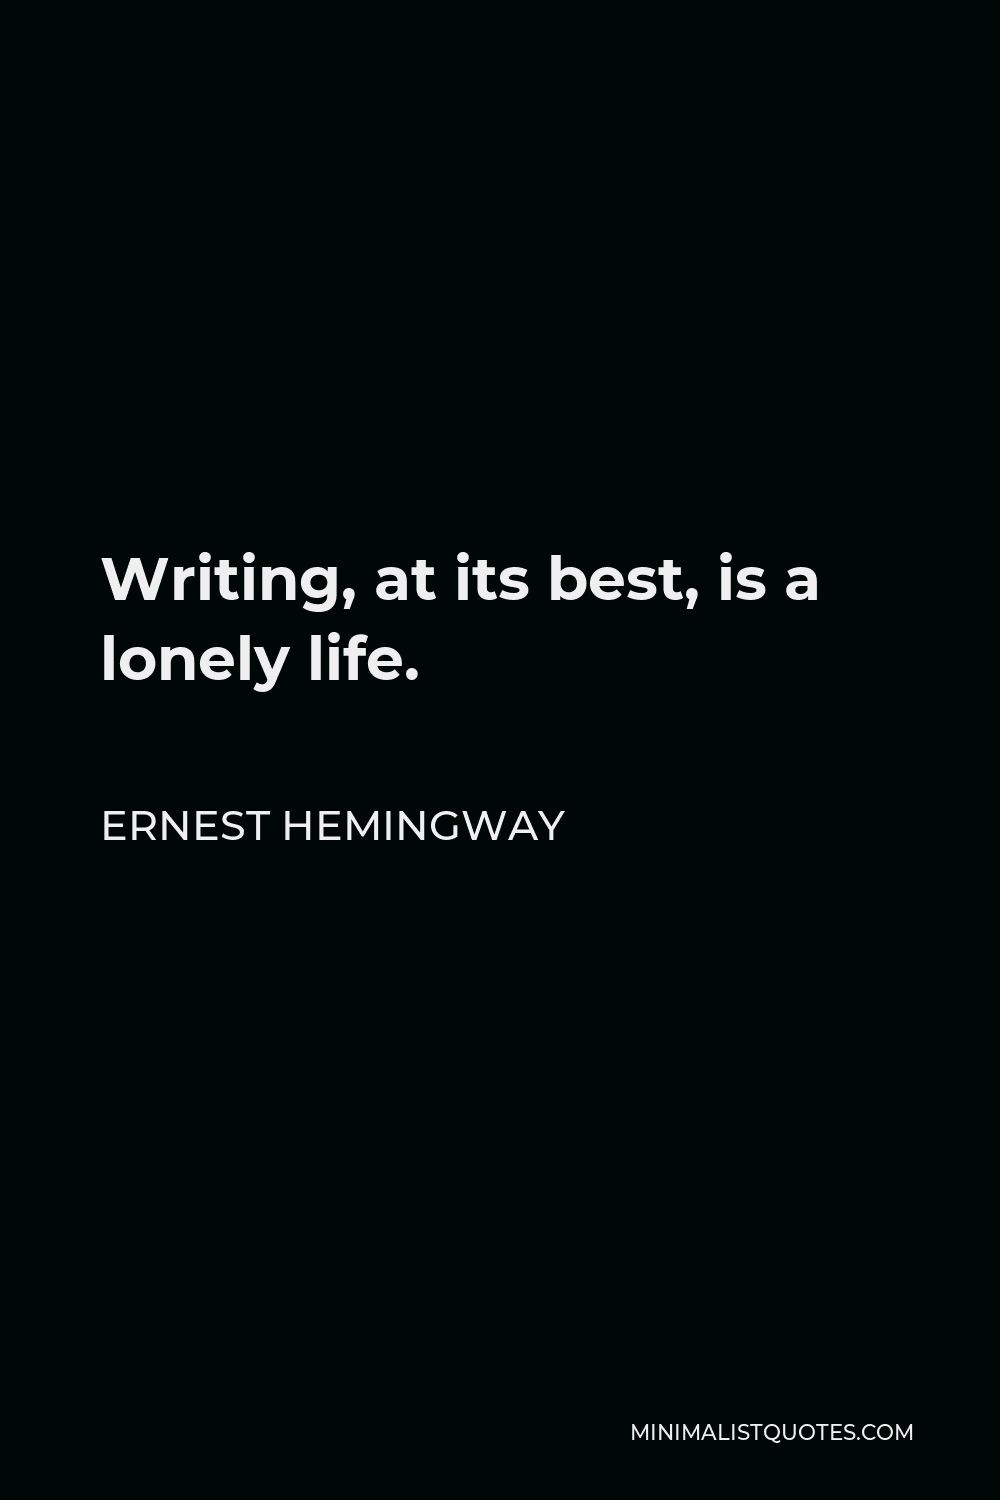 Ernest Hemingway Quote - Writing, at its best, is a lonely life.